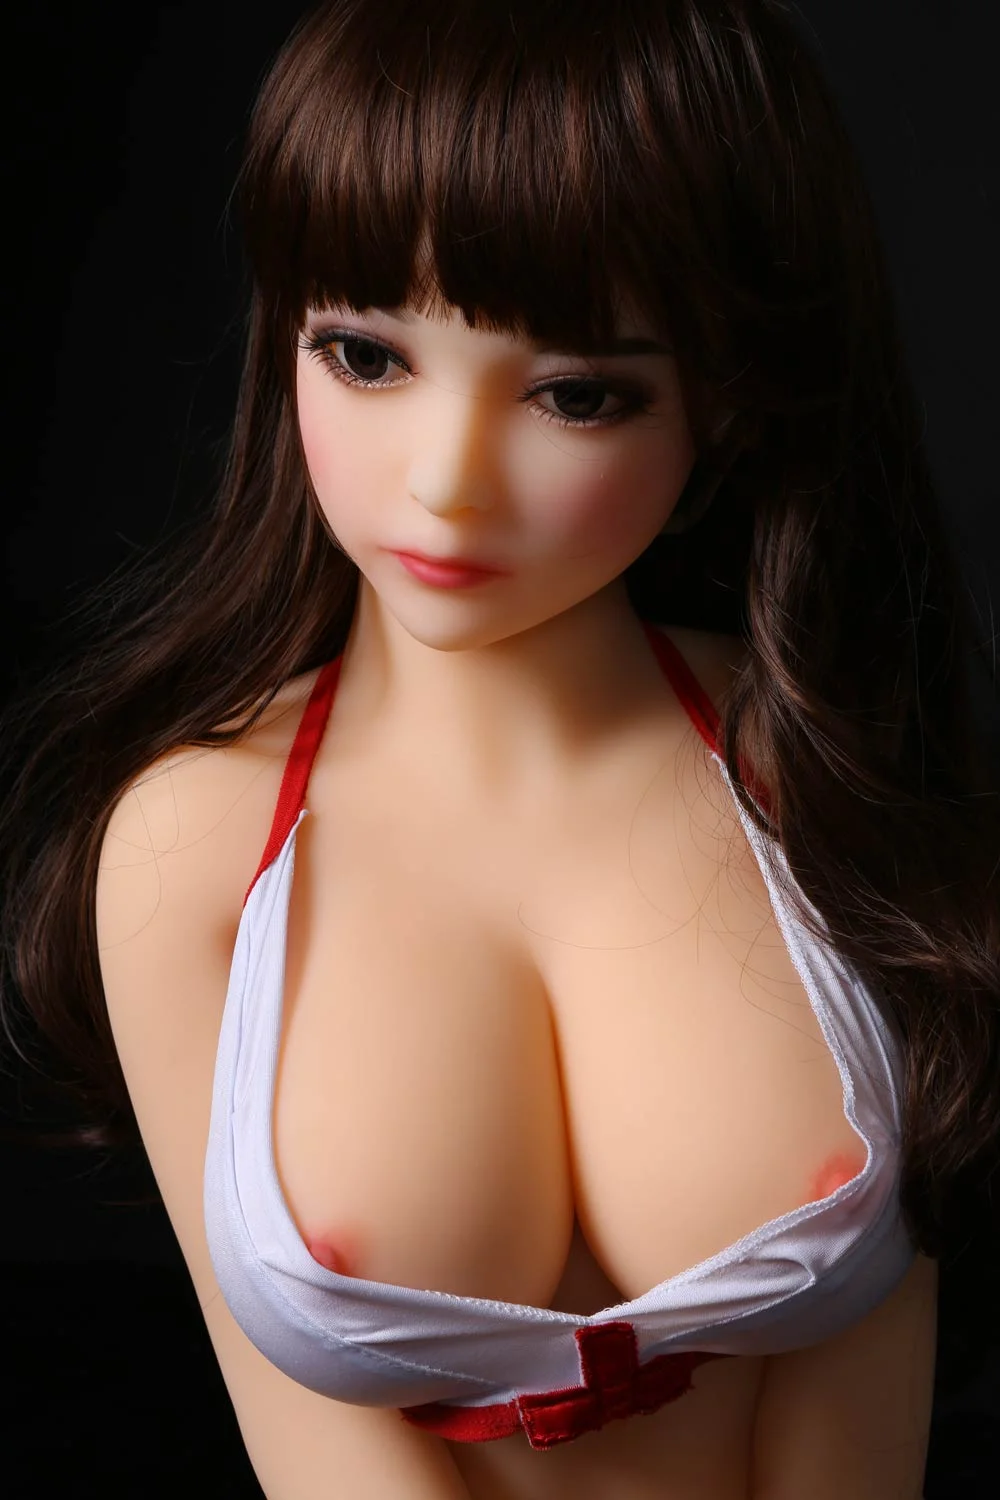 Mini sex doll with pink nipples sticking out